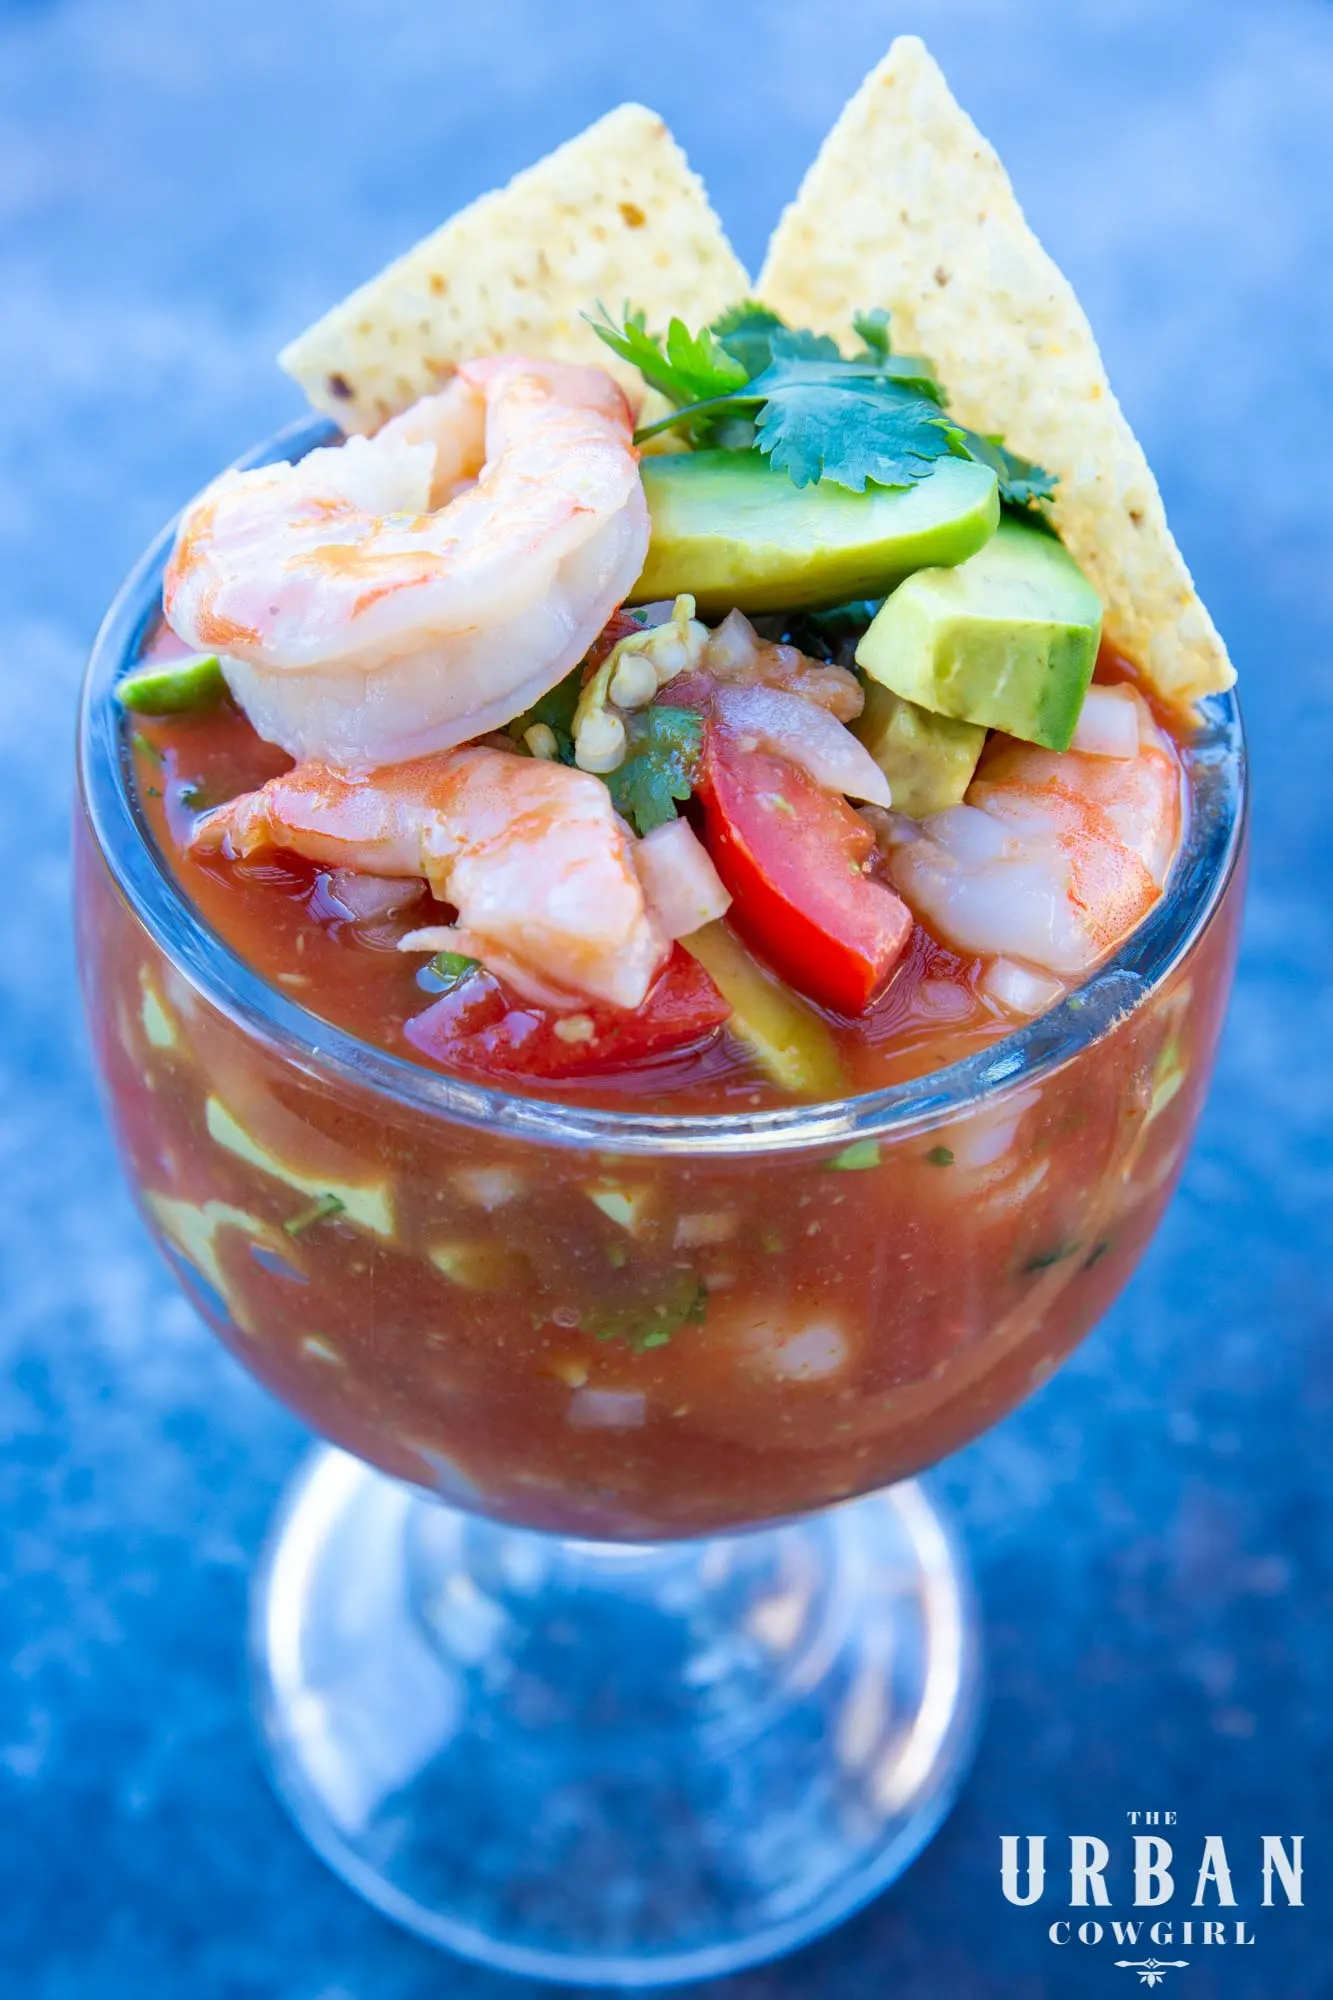 Authentic Mexican shrimp cocktail in a schooner glass, made with mandarin soda, as prepared in Mexico.